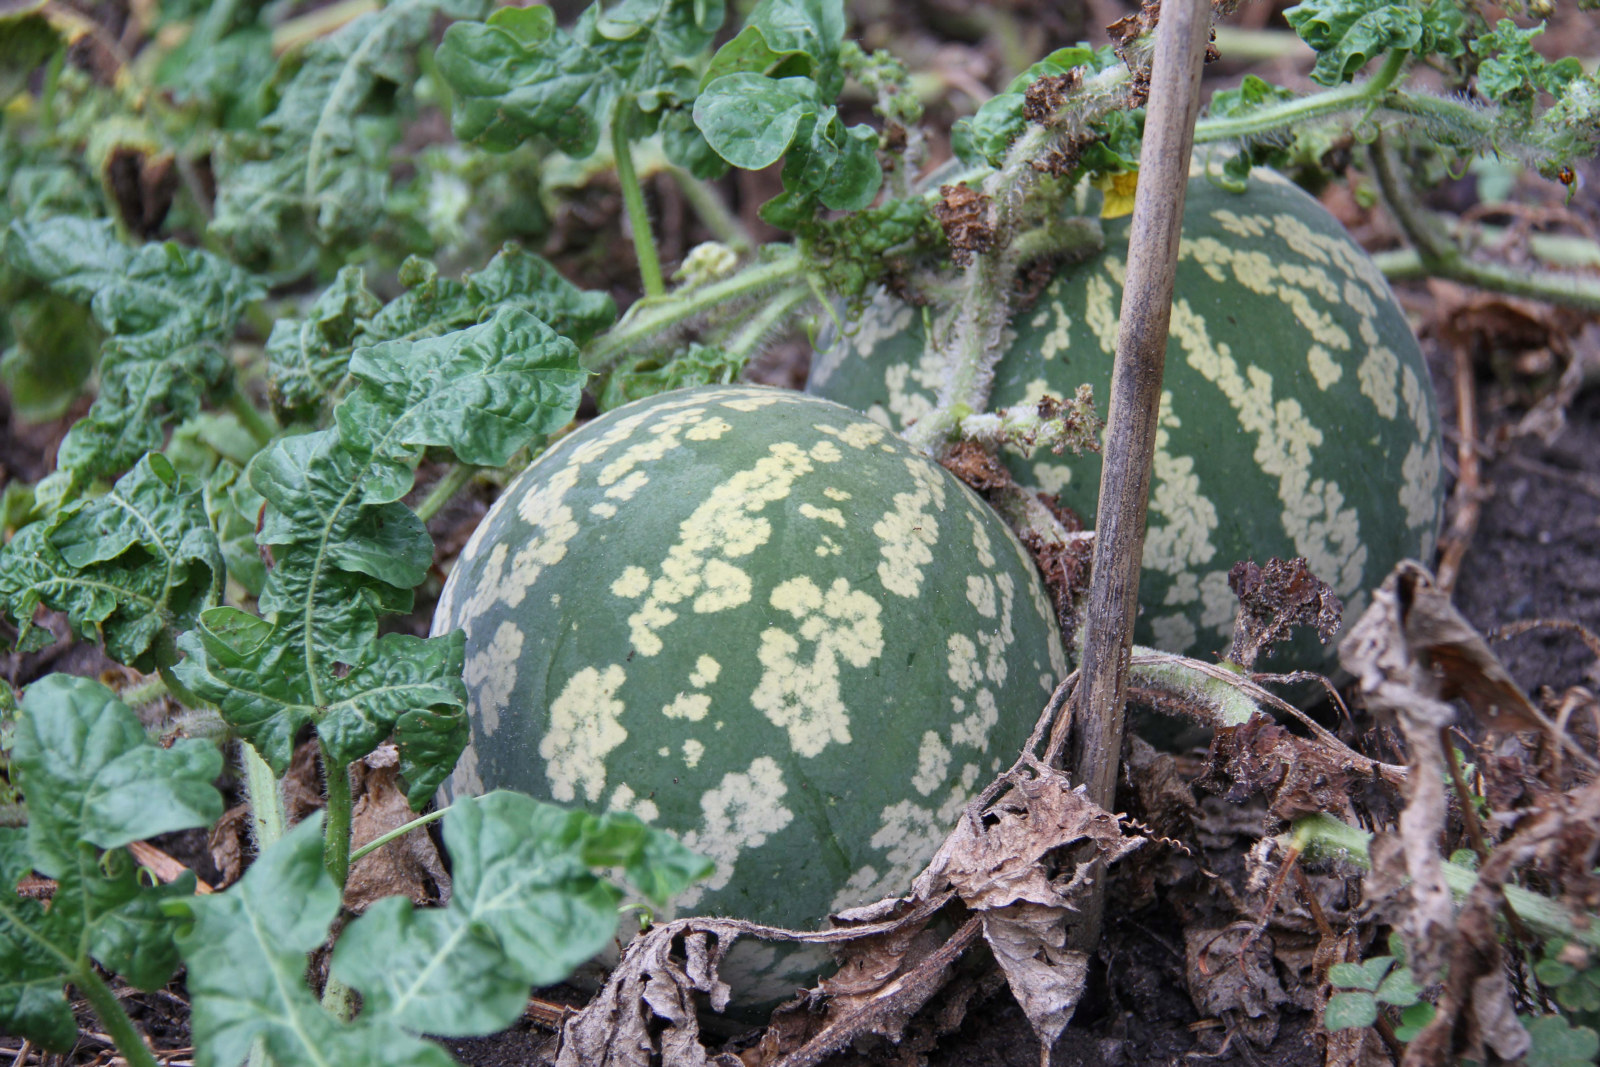 Photograph of a large green melon on a dark green background